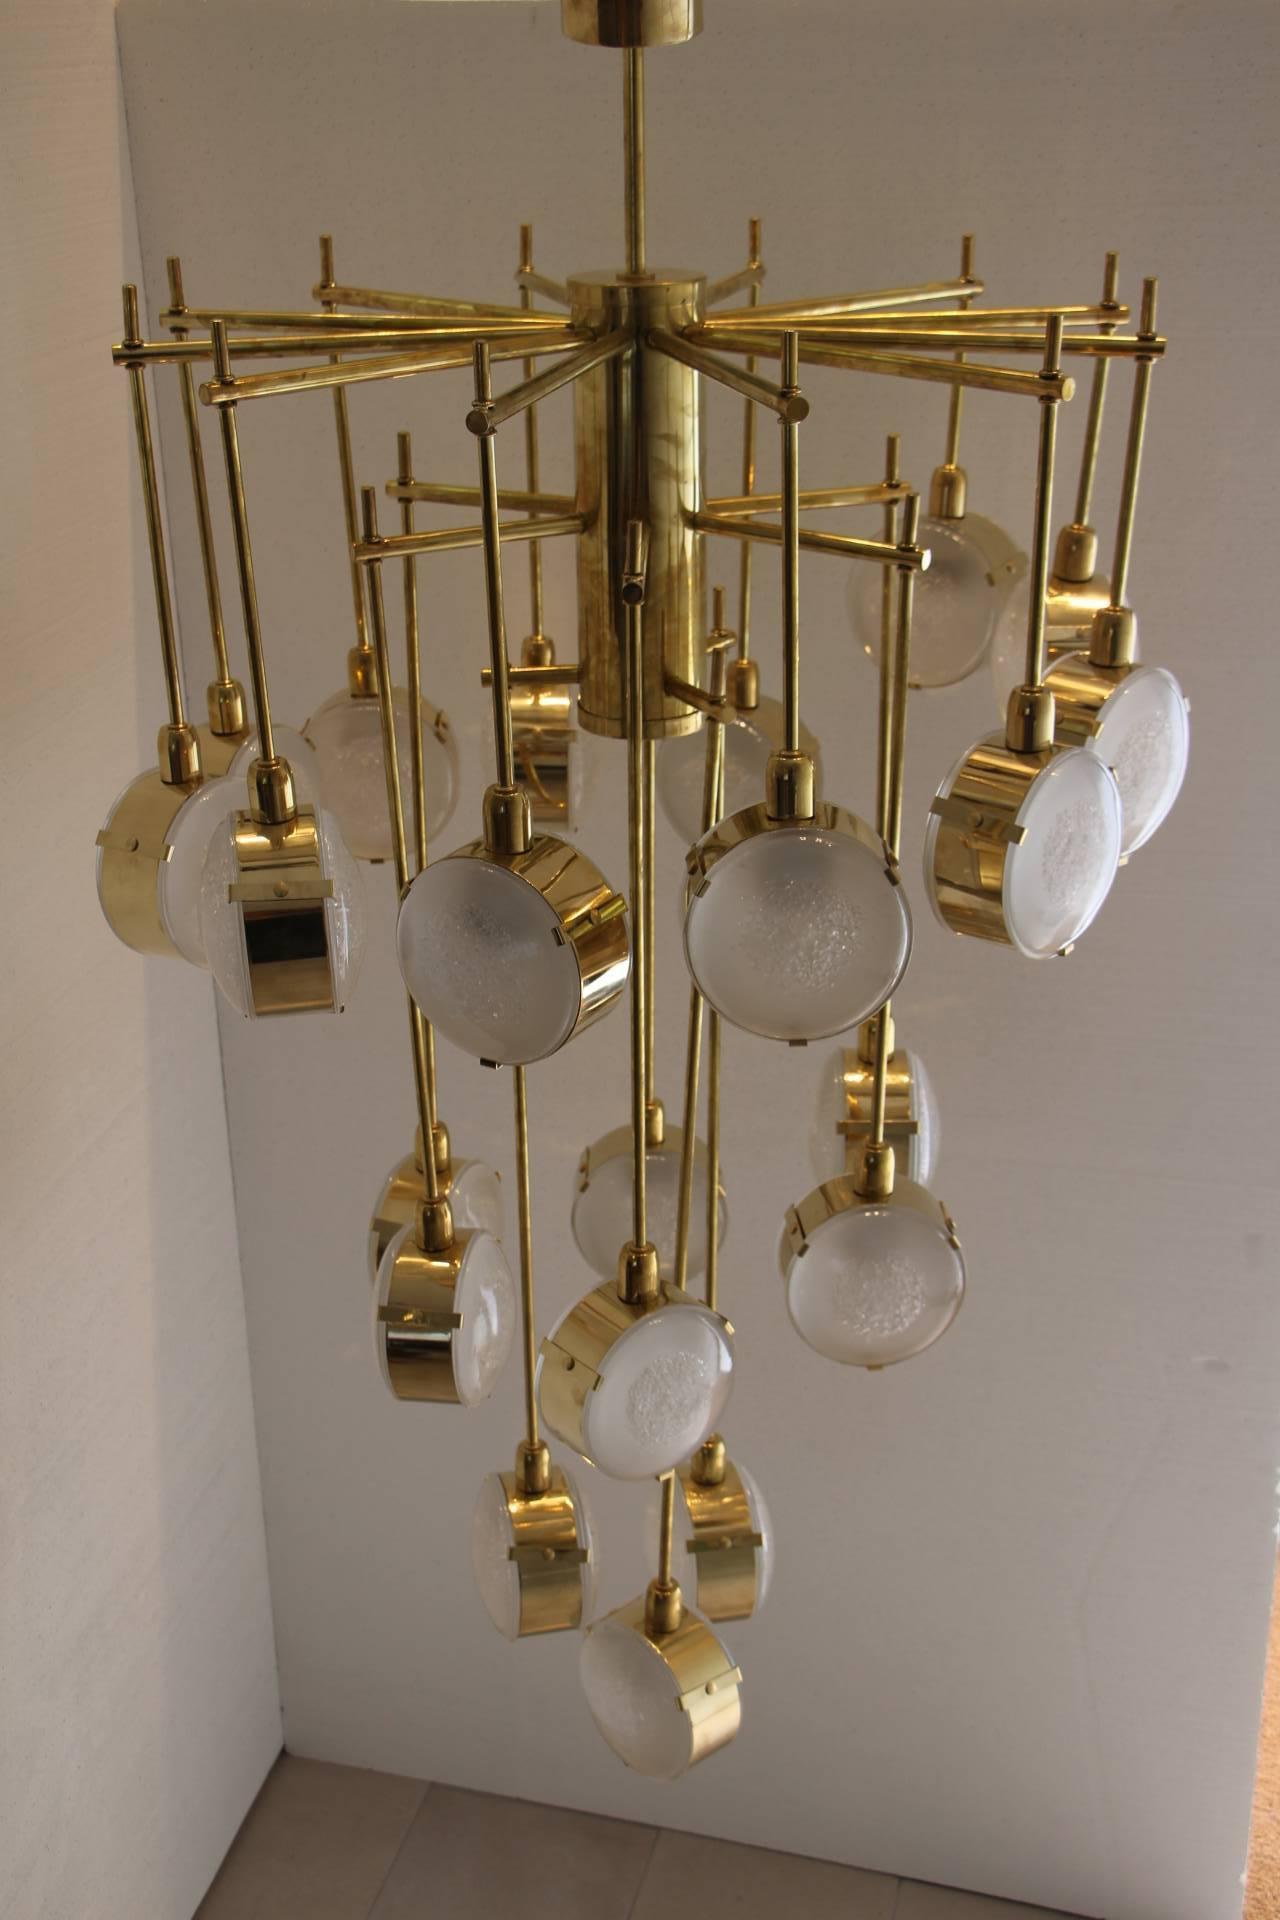 This chandelier features twenty-one lights. It is very unusual shape.
Each vertical rod is finished by a double-sided glass circled in brass ring. 
Every piece of glass has quartz inclusions, which make many reflects inside the glass .It is